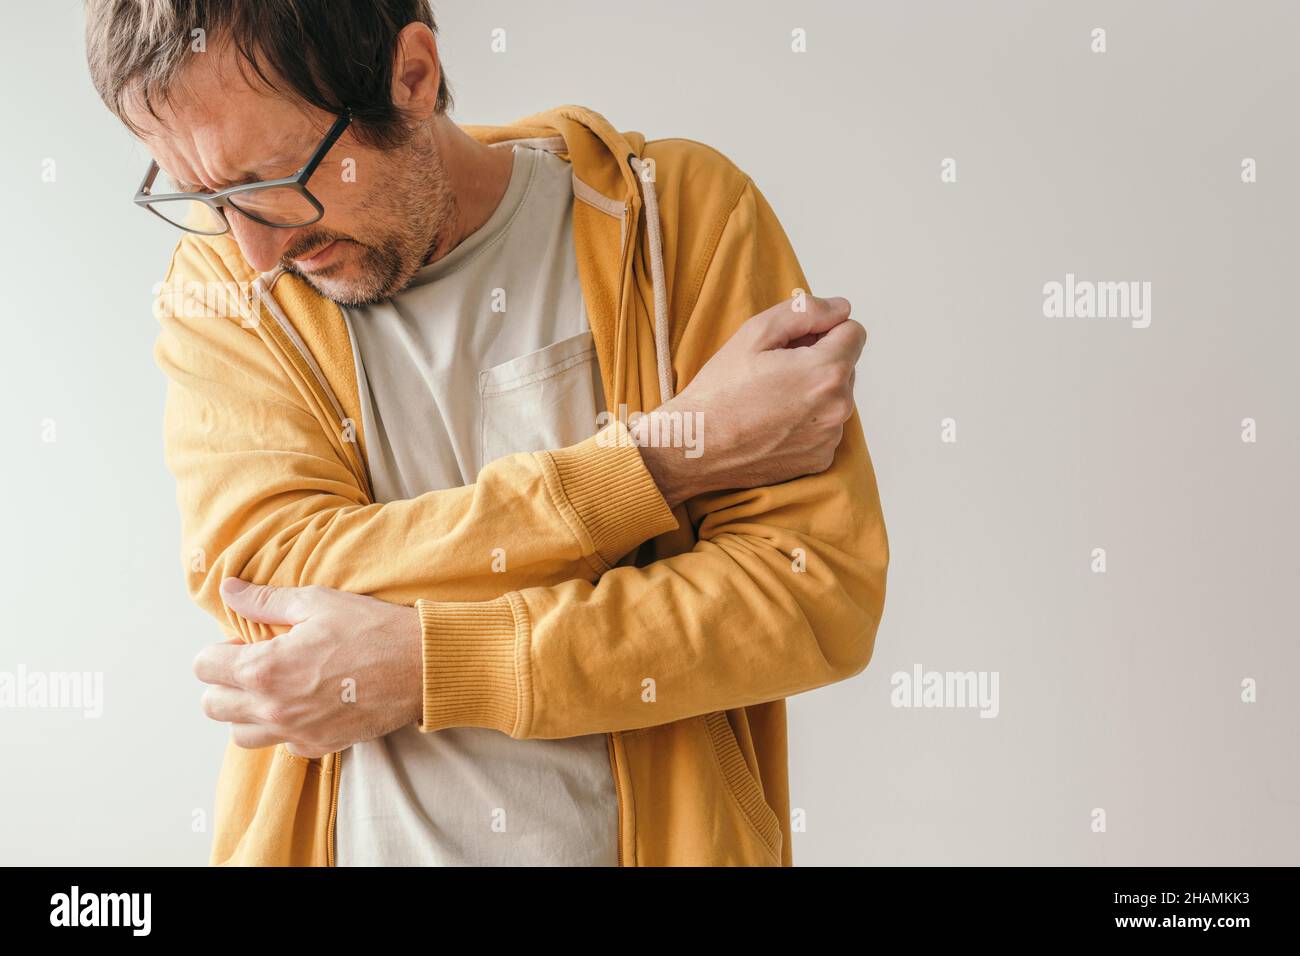 Aching elbow as symptom of tendinitis, adult caucasian male with painful grimace looking down at his joint Stock Photo